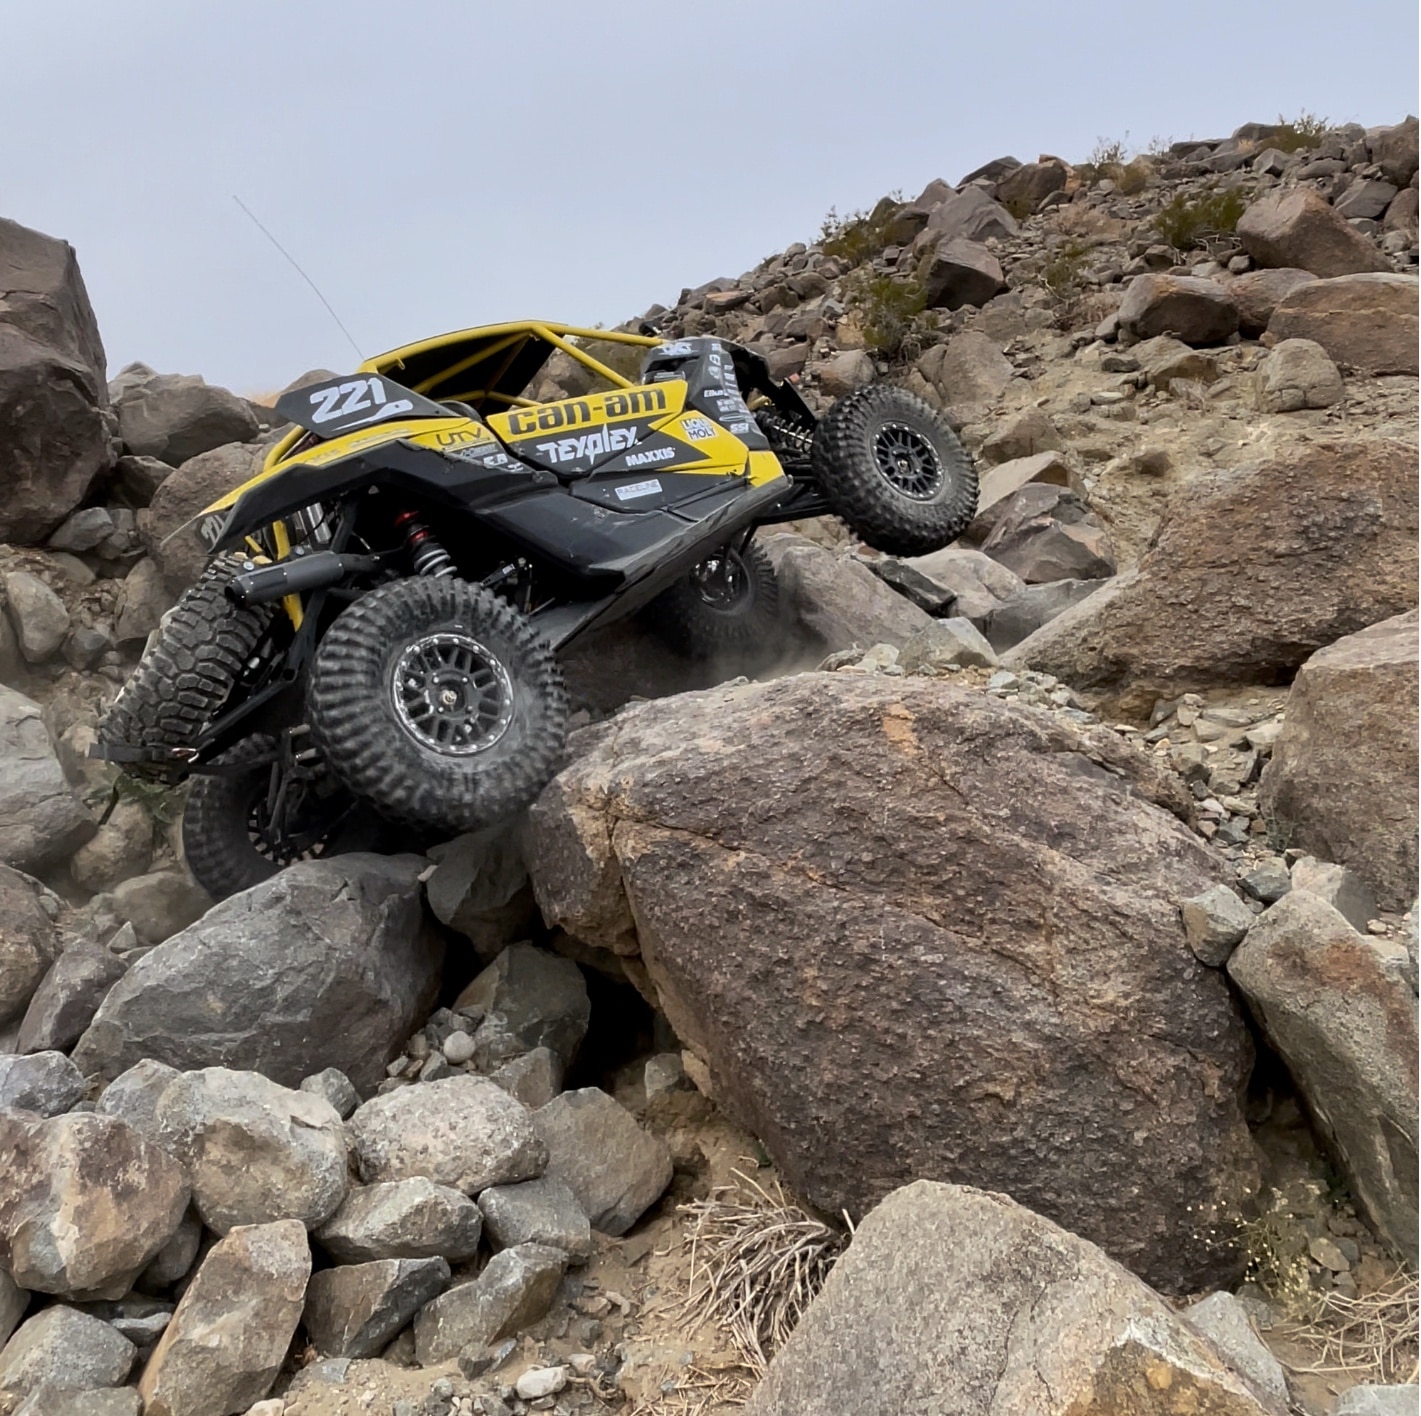 Custom-built black and yellow Can-Am side-by-side leaning to the left as it crawls up large rocks.